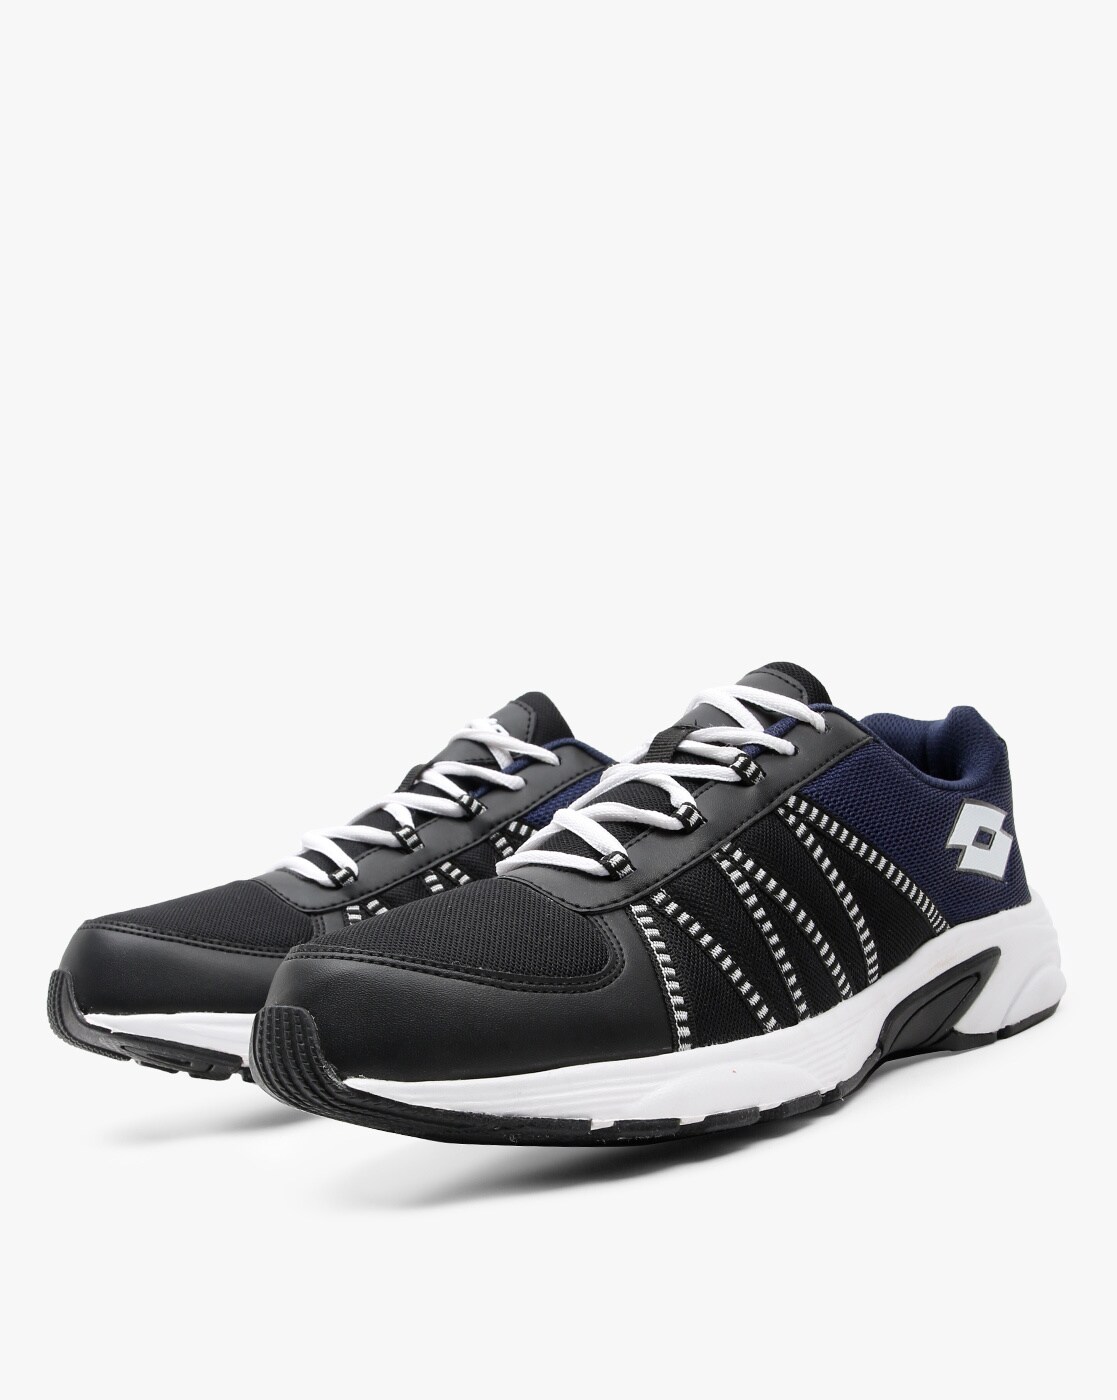 lotto navy blue shoes